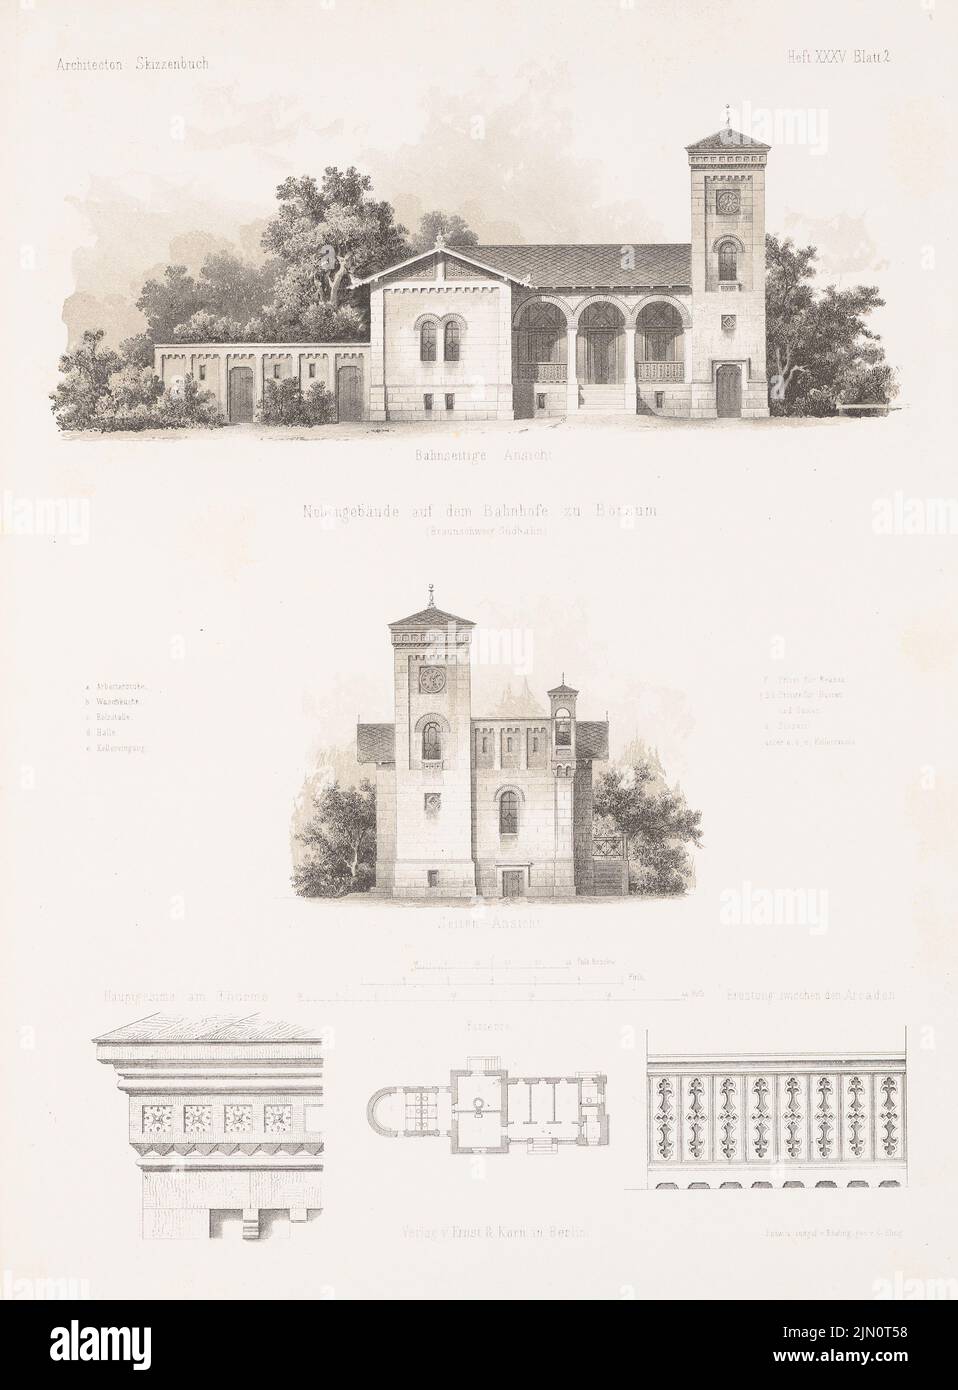 N.N., outbuilding at the train station, Börßum. (From: Architectural sketchbook, H. 35, 1858.) (1858-1858): floor plan, view from the railway side, side view, details. Lithography colored on paper, 66.1 x 48.7 cm (including scan edges) N.N. : Nebengebäude auf dem Bahnhof, Börßum. (Aus: Architektonisches Skizzenbuch, H. 35, 1858) Stock Photo